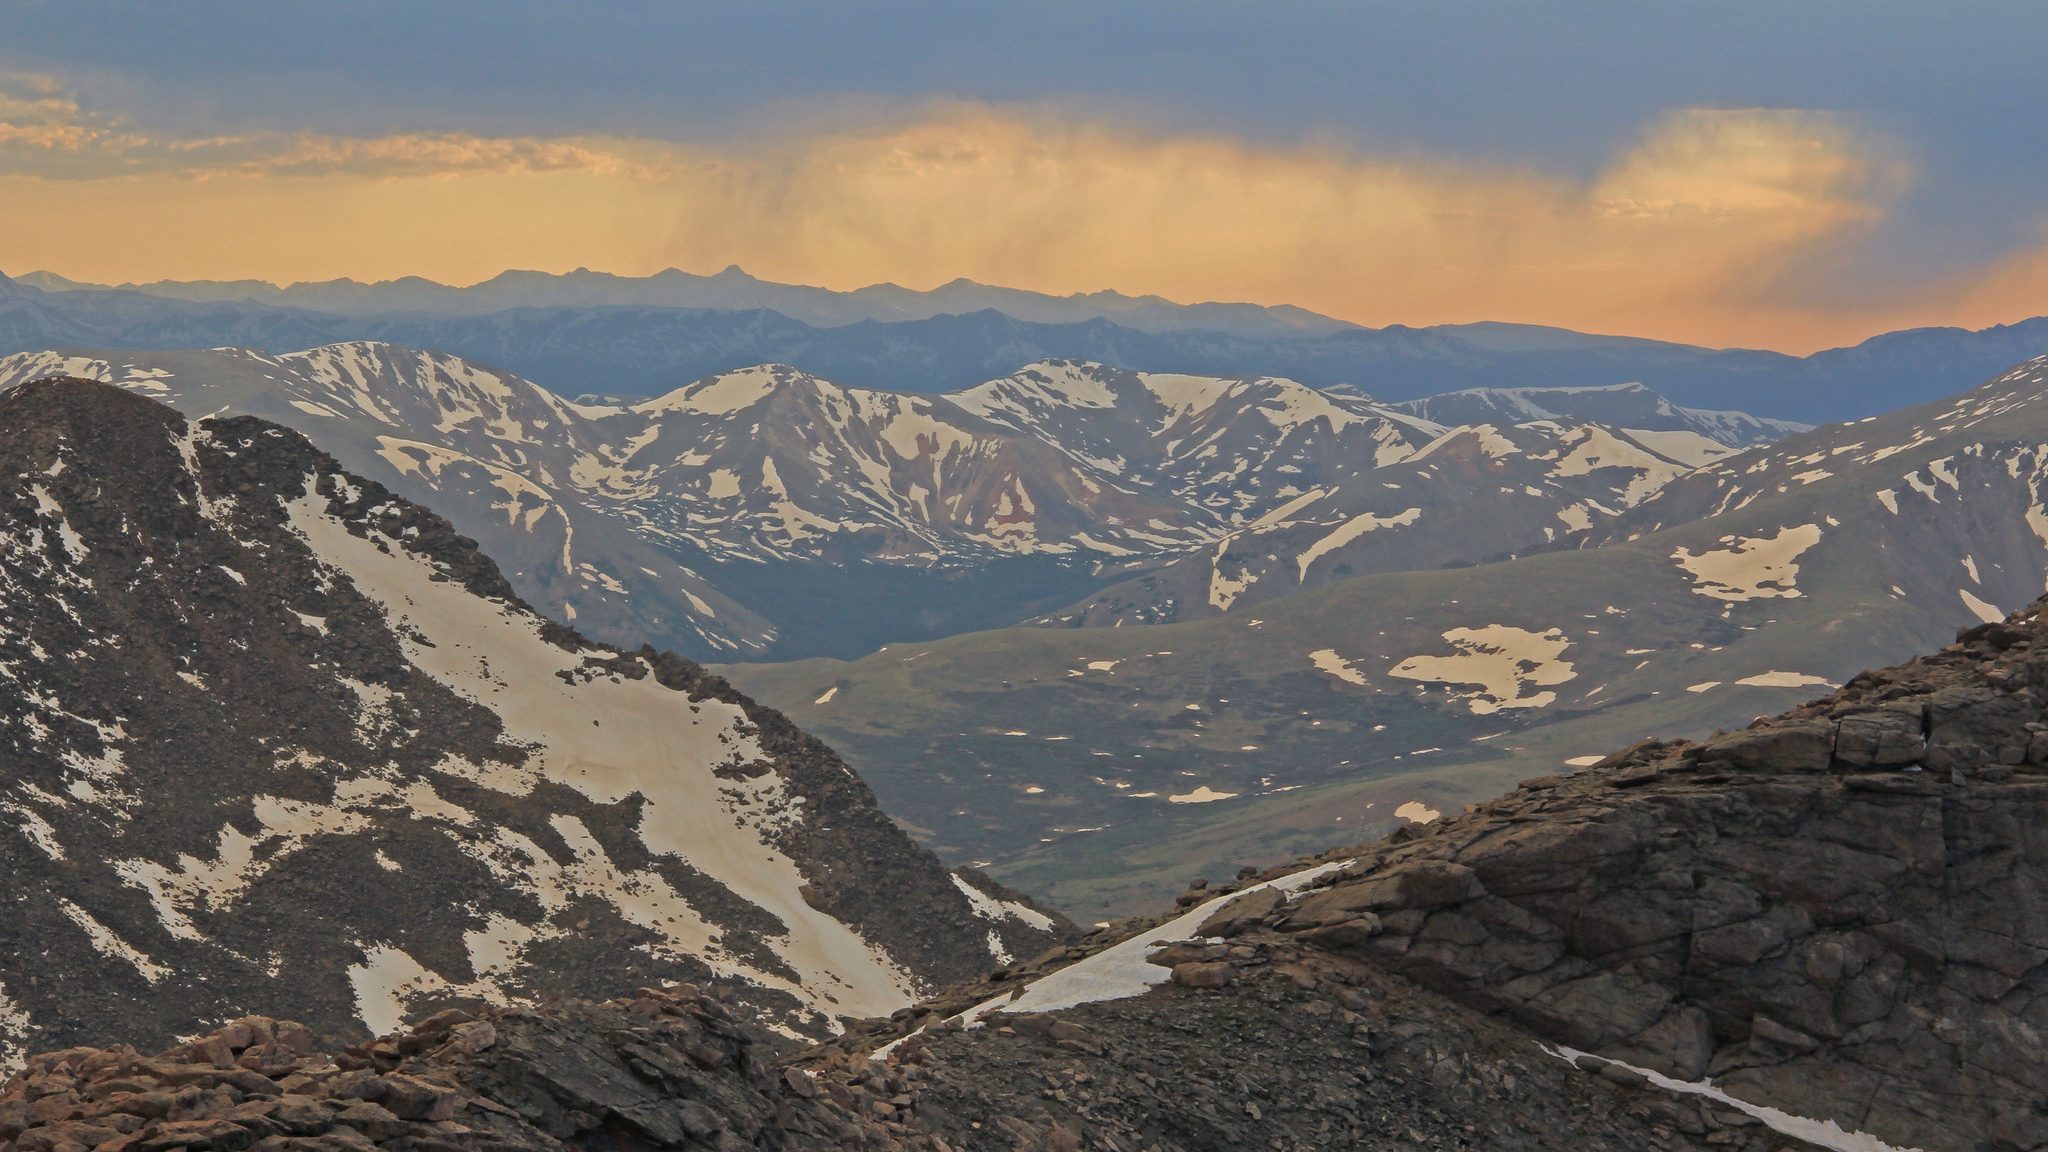 Mount Evans summit in Arapaho National Forest, Colorado